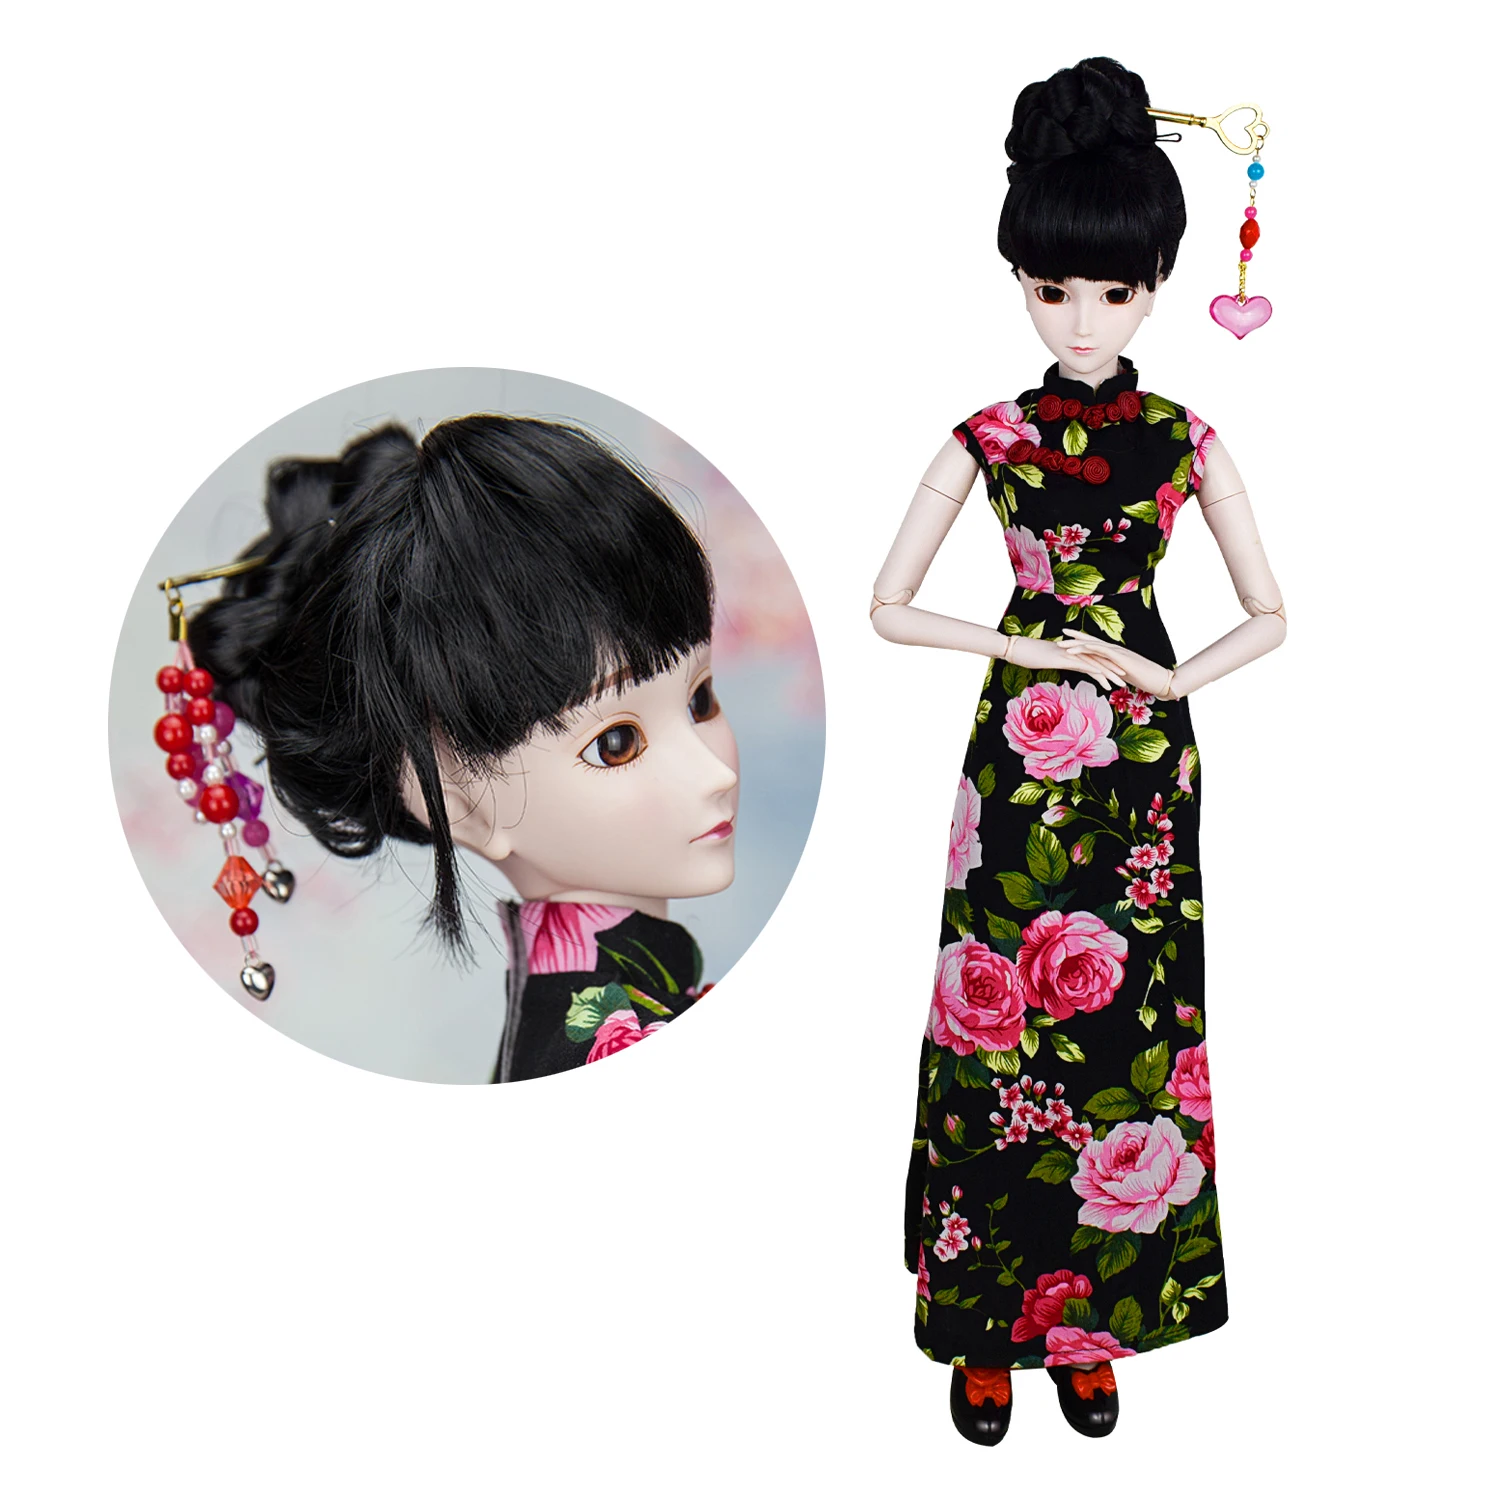 

EVA BJD 1/3 BJD Doll Chinese Cheongsam Donna 60cm 24in 22 Ball Jointed SD Dolls Makeup Full Set Toy Surprise Doll for Girl Gift